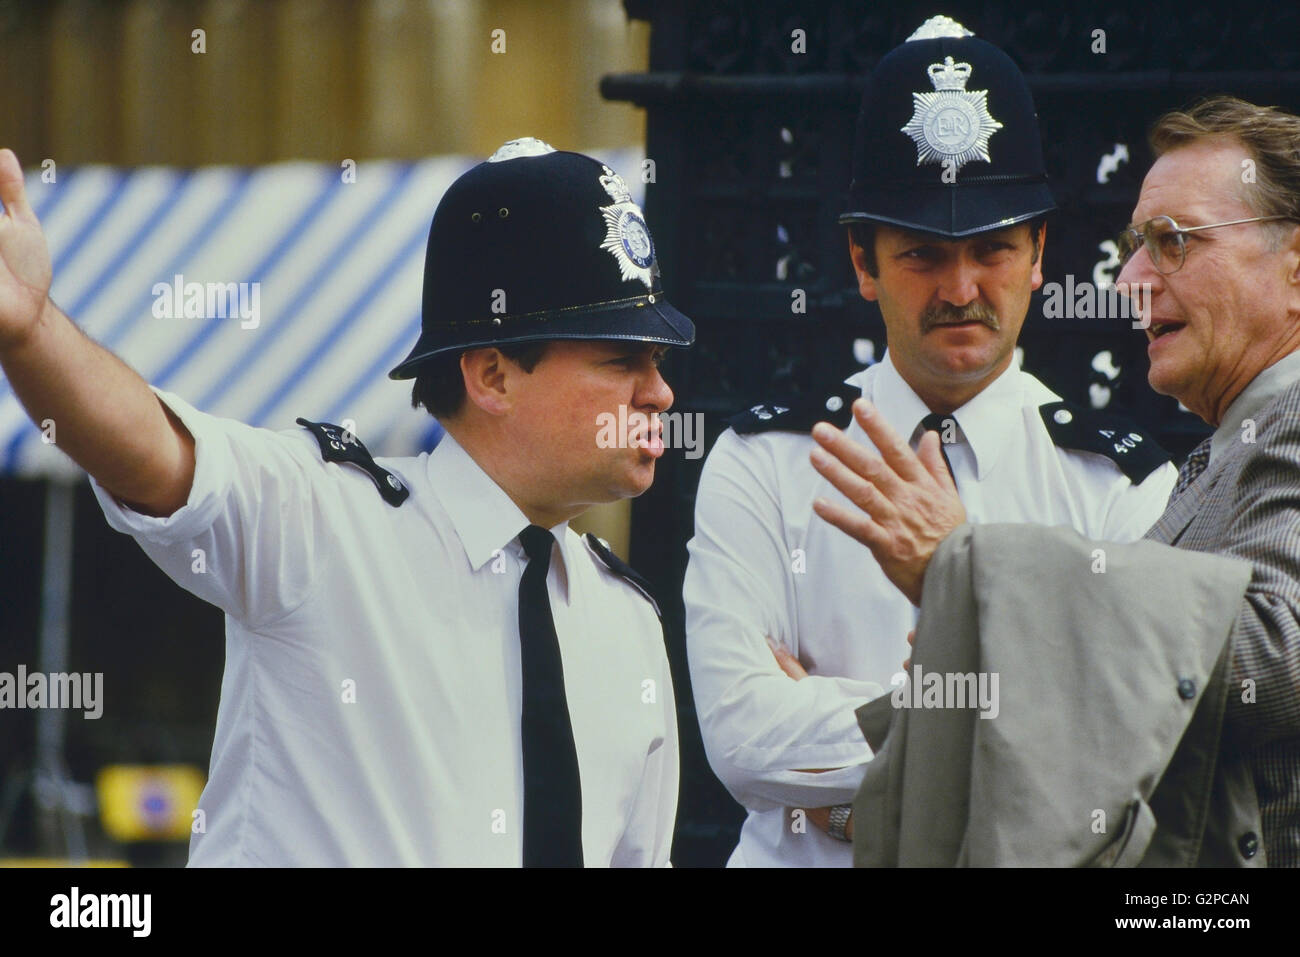 A man asking the police for directions. London. England. UK. Europe. Circa 1980's Stock Photo